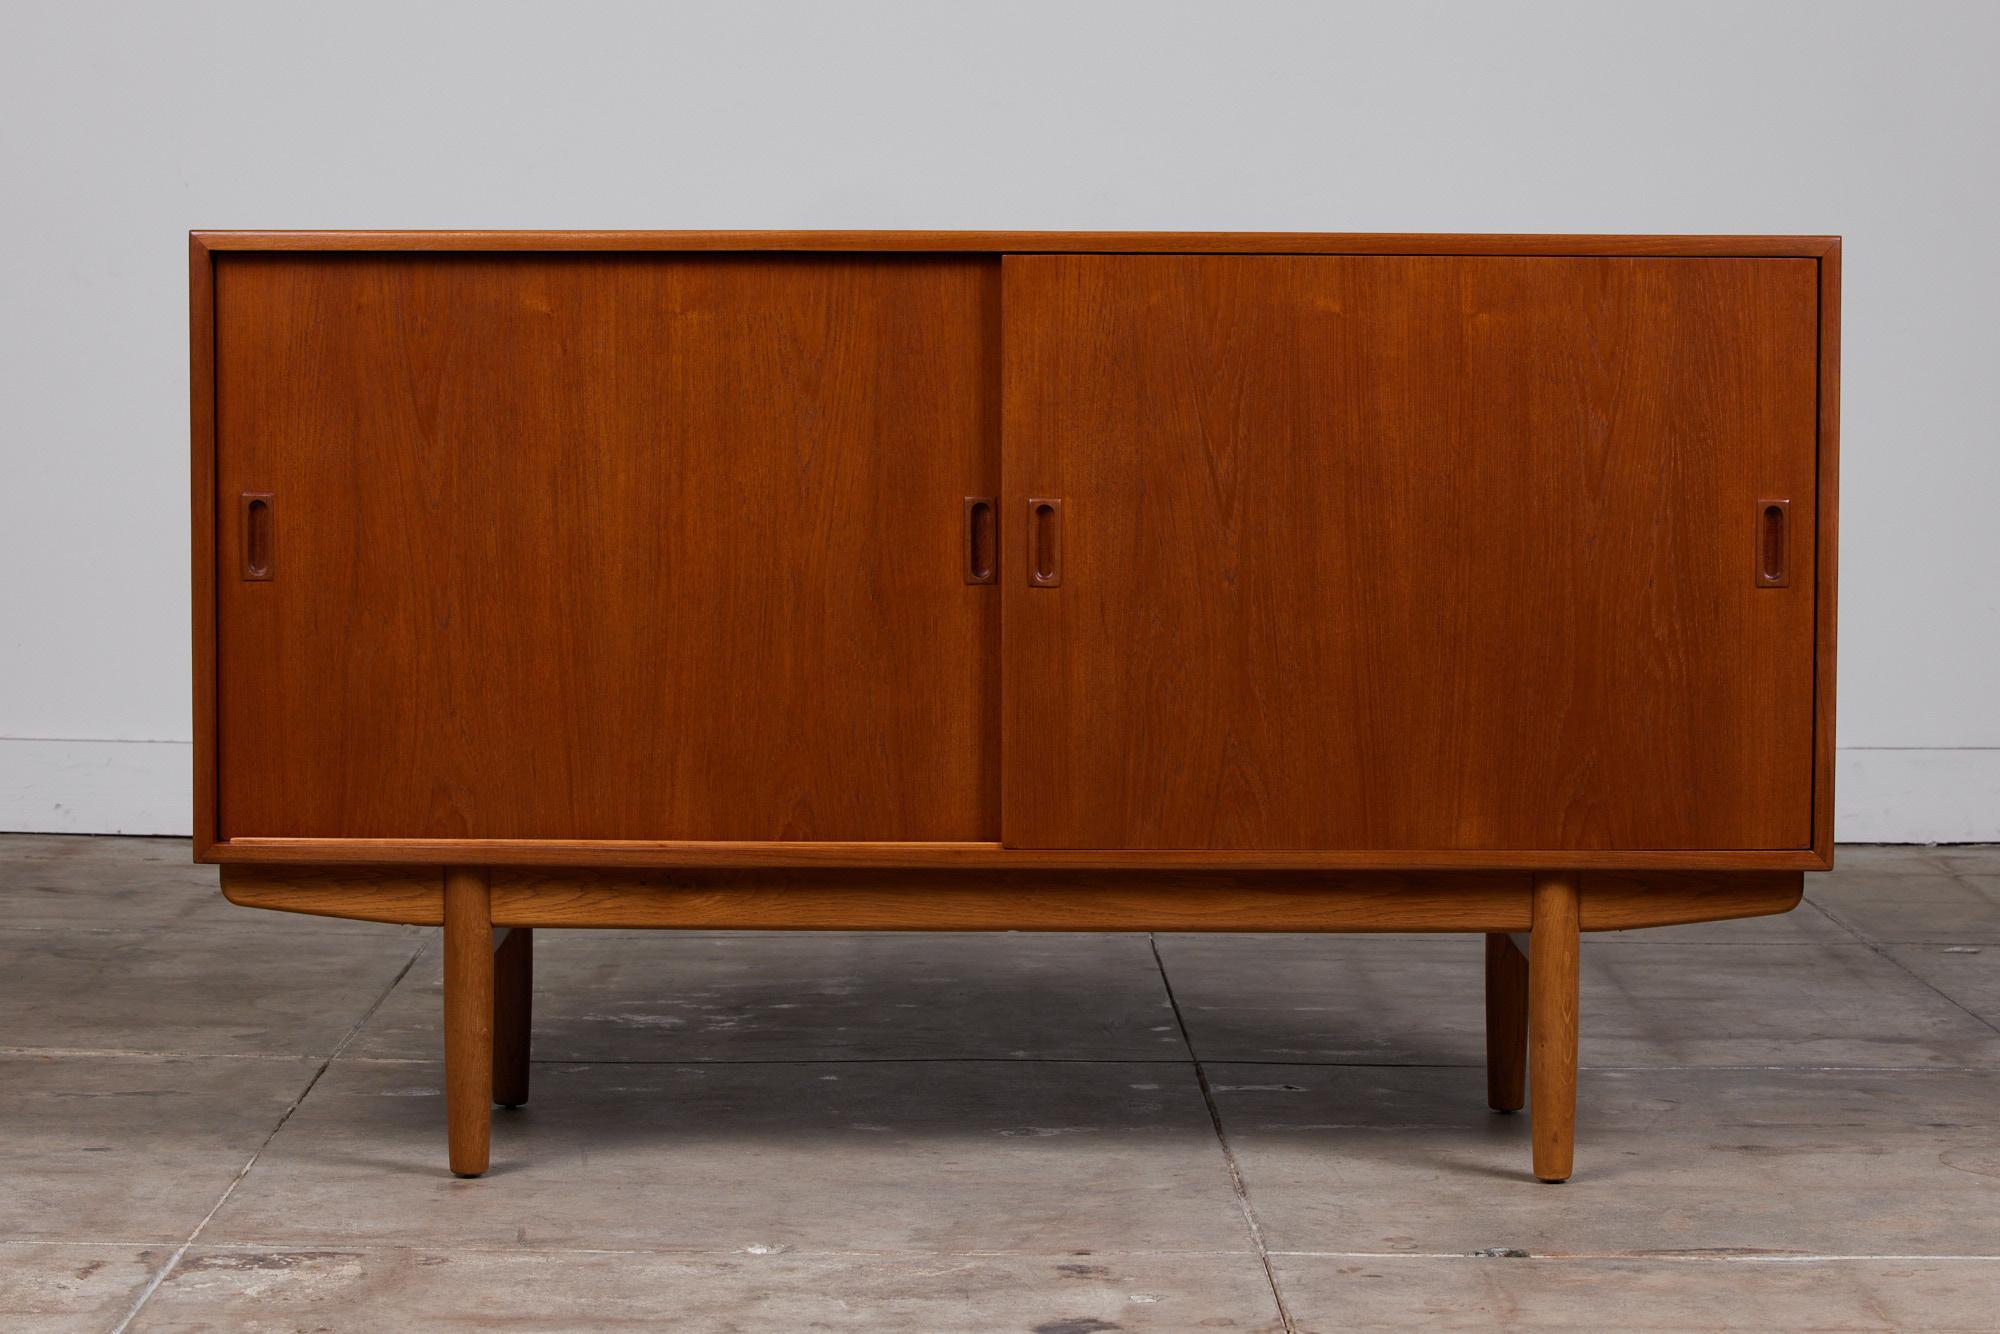 Børge Mogensen teak and oak cabinet for Soborg Mobler, Denmark, c.1950s. This cabinet features four interior drawers with two adjustable shelves.

Dimensions: 59